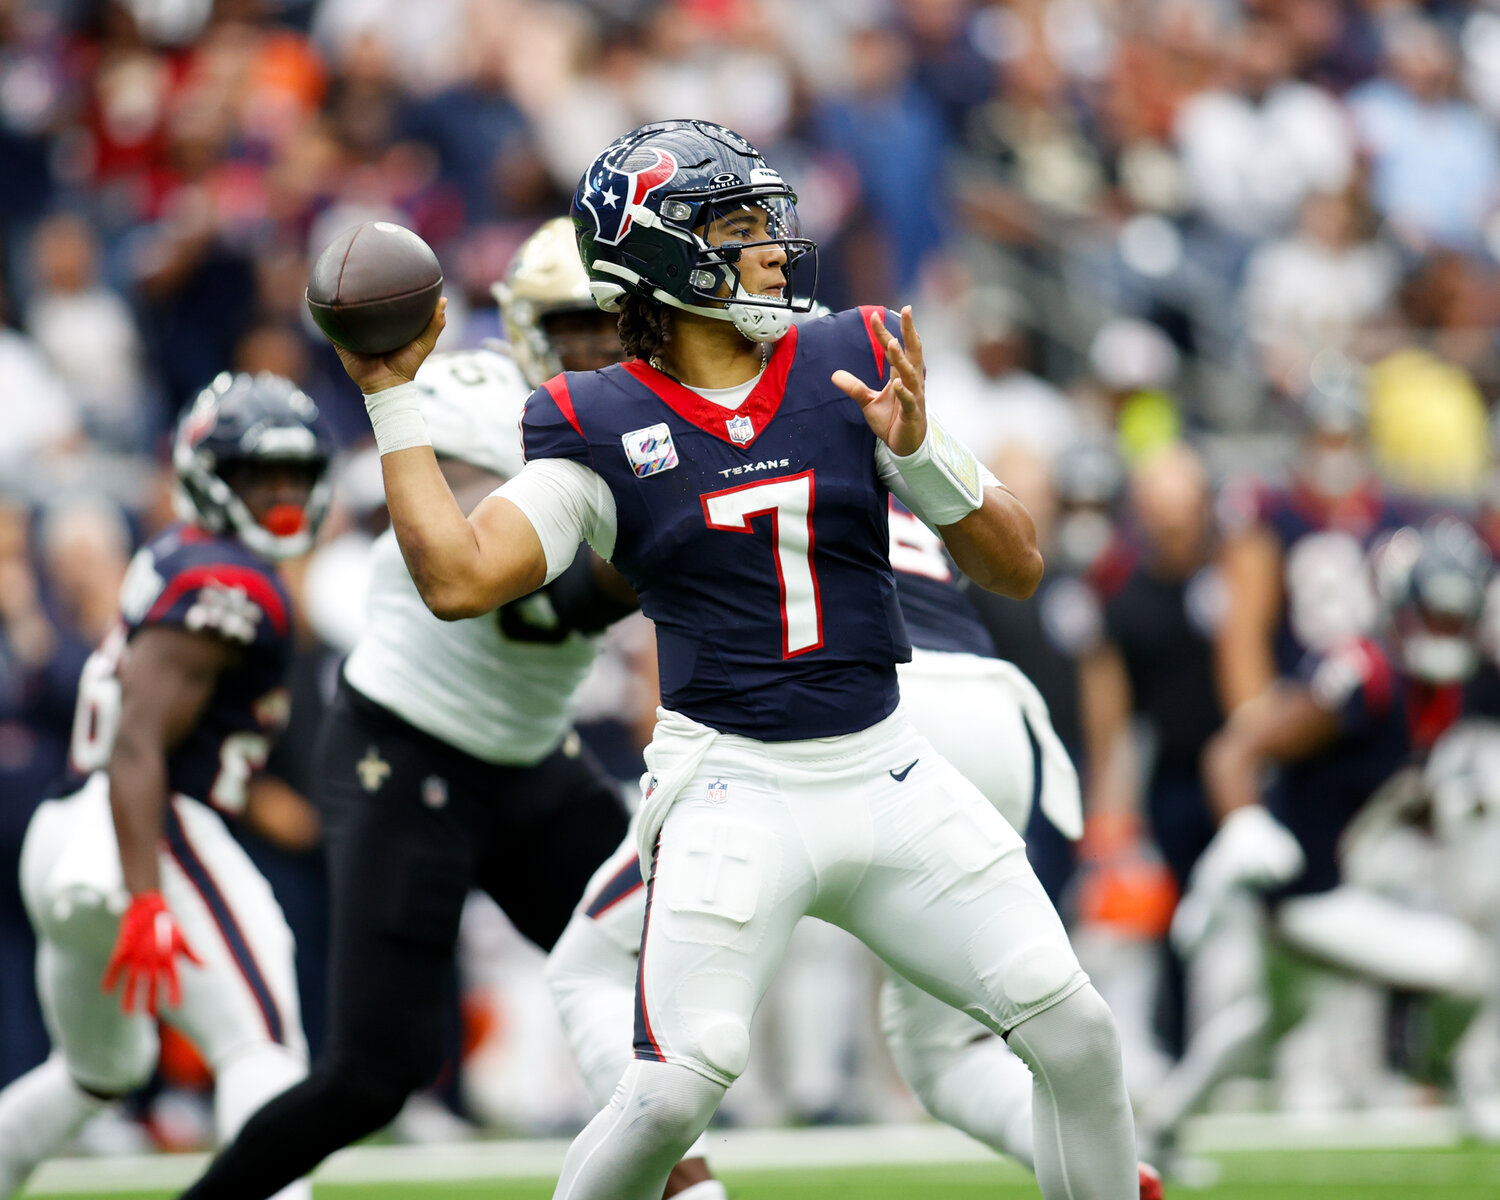 Texans quarterback C.J. Stroud (7) passes the ball during an NFL game between the Texans and the Saints on October 15, 2023 in Houston. The Texans won, 20-13.